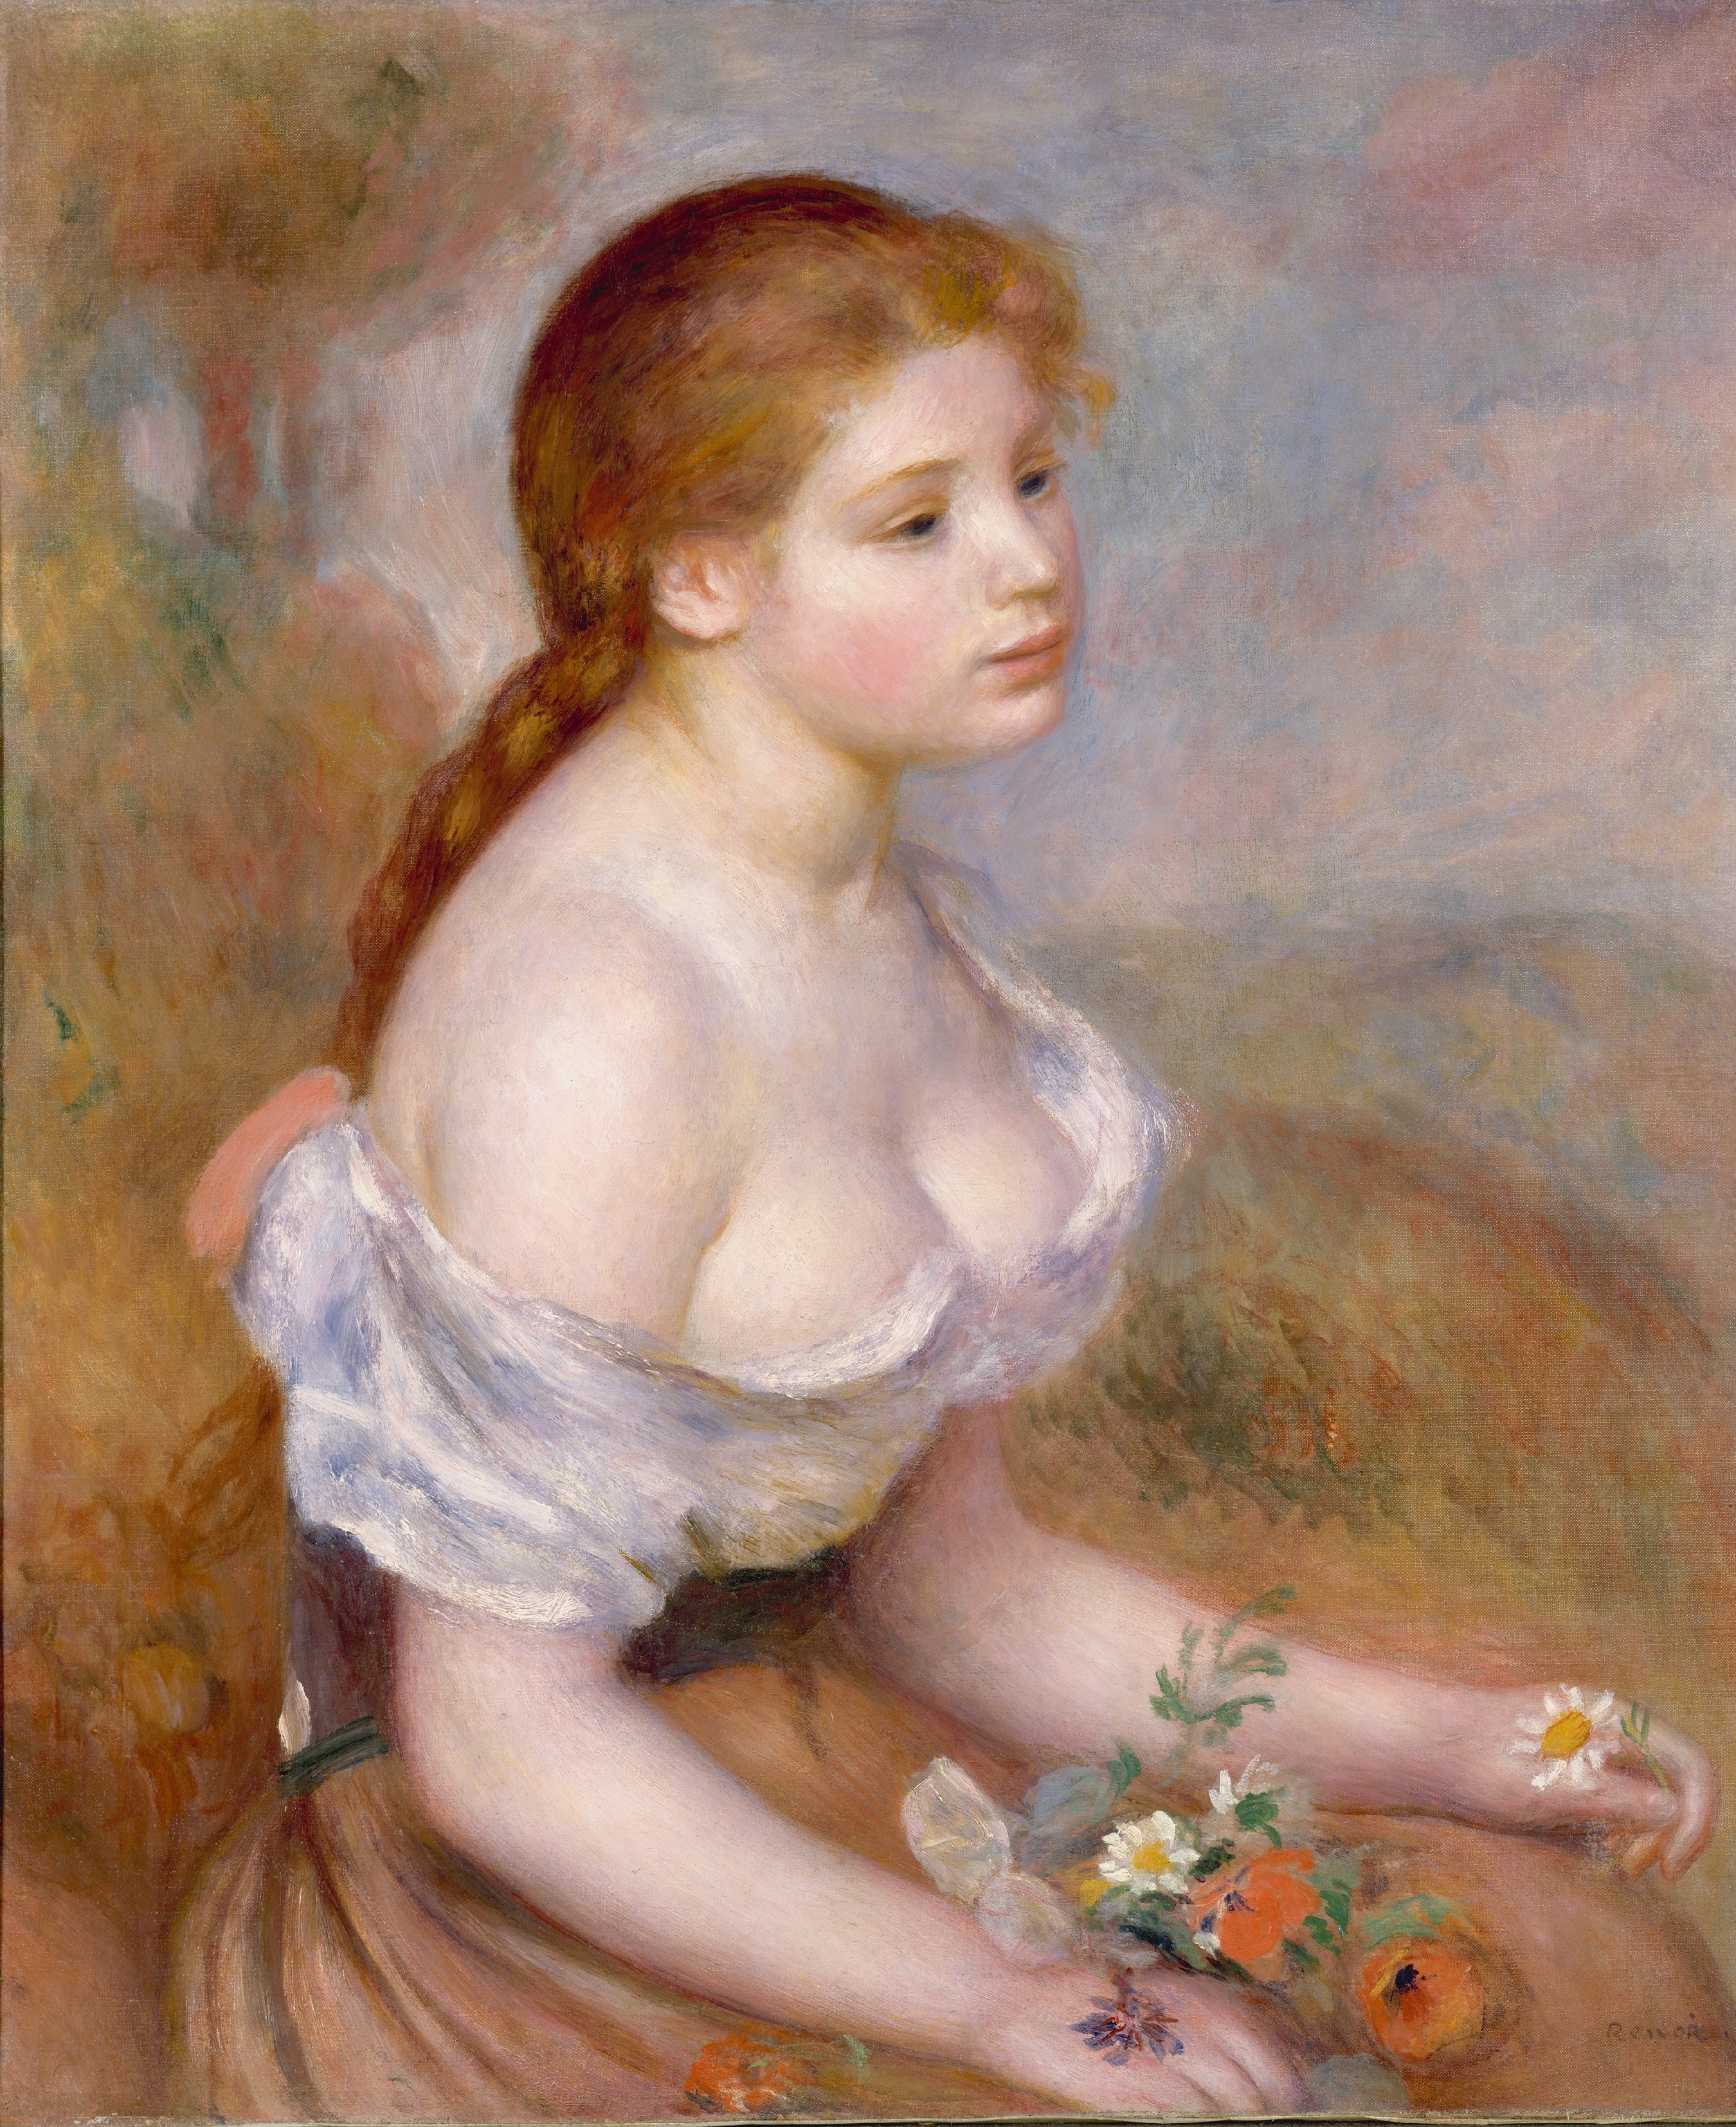 Young girl with daisies 1889